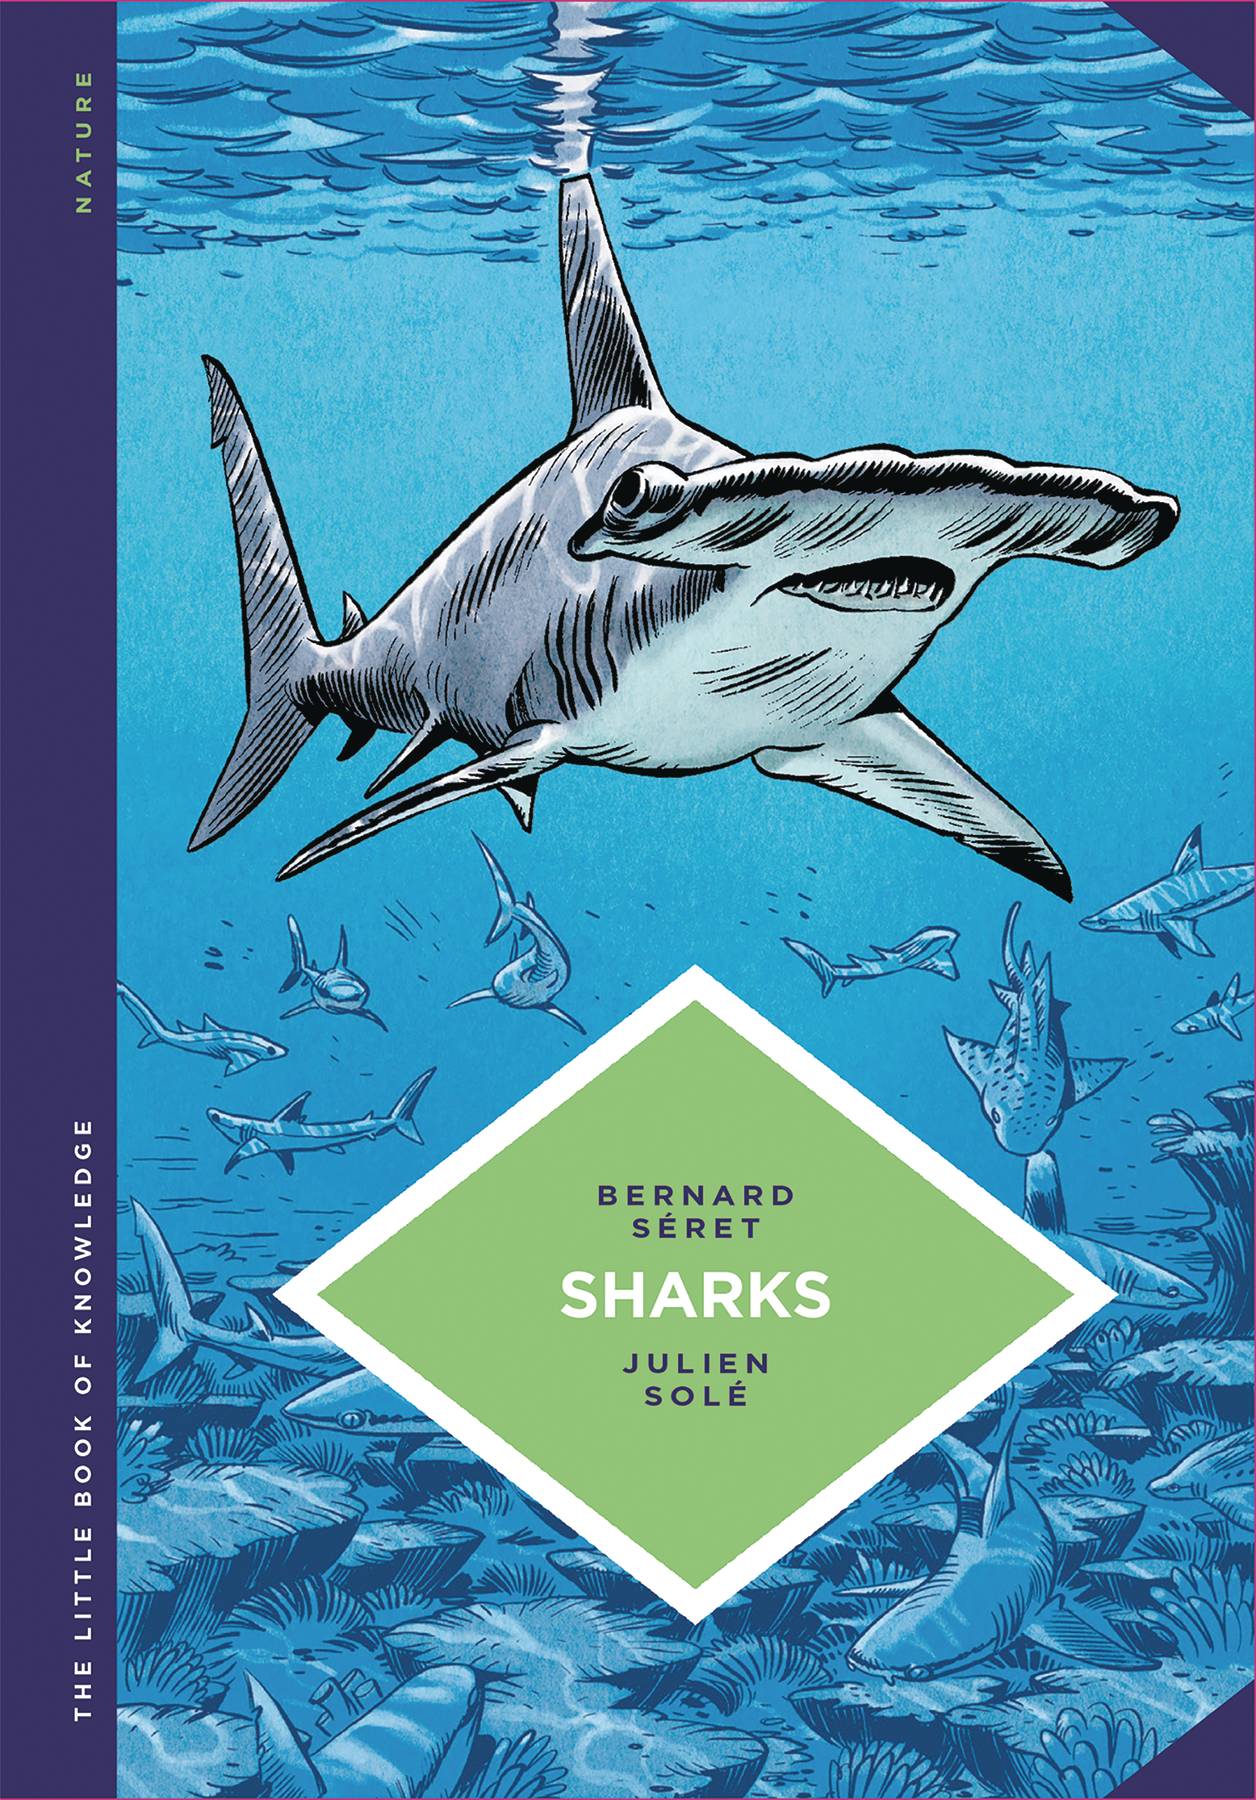 Book　Hardcover　Art　of　Comics　Knowledge　and　Sharks　Mission:　Buy　Little